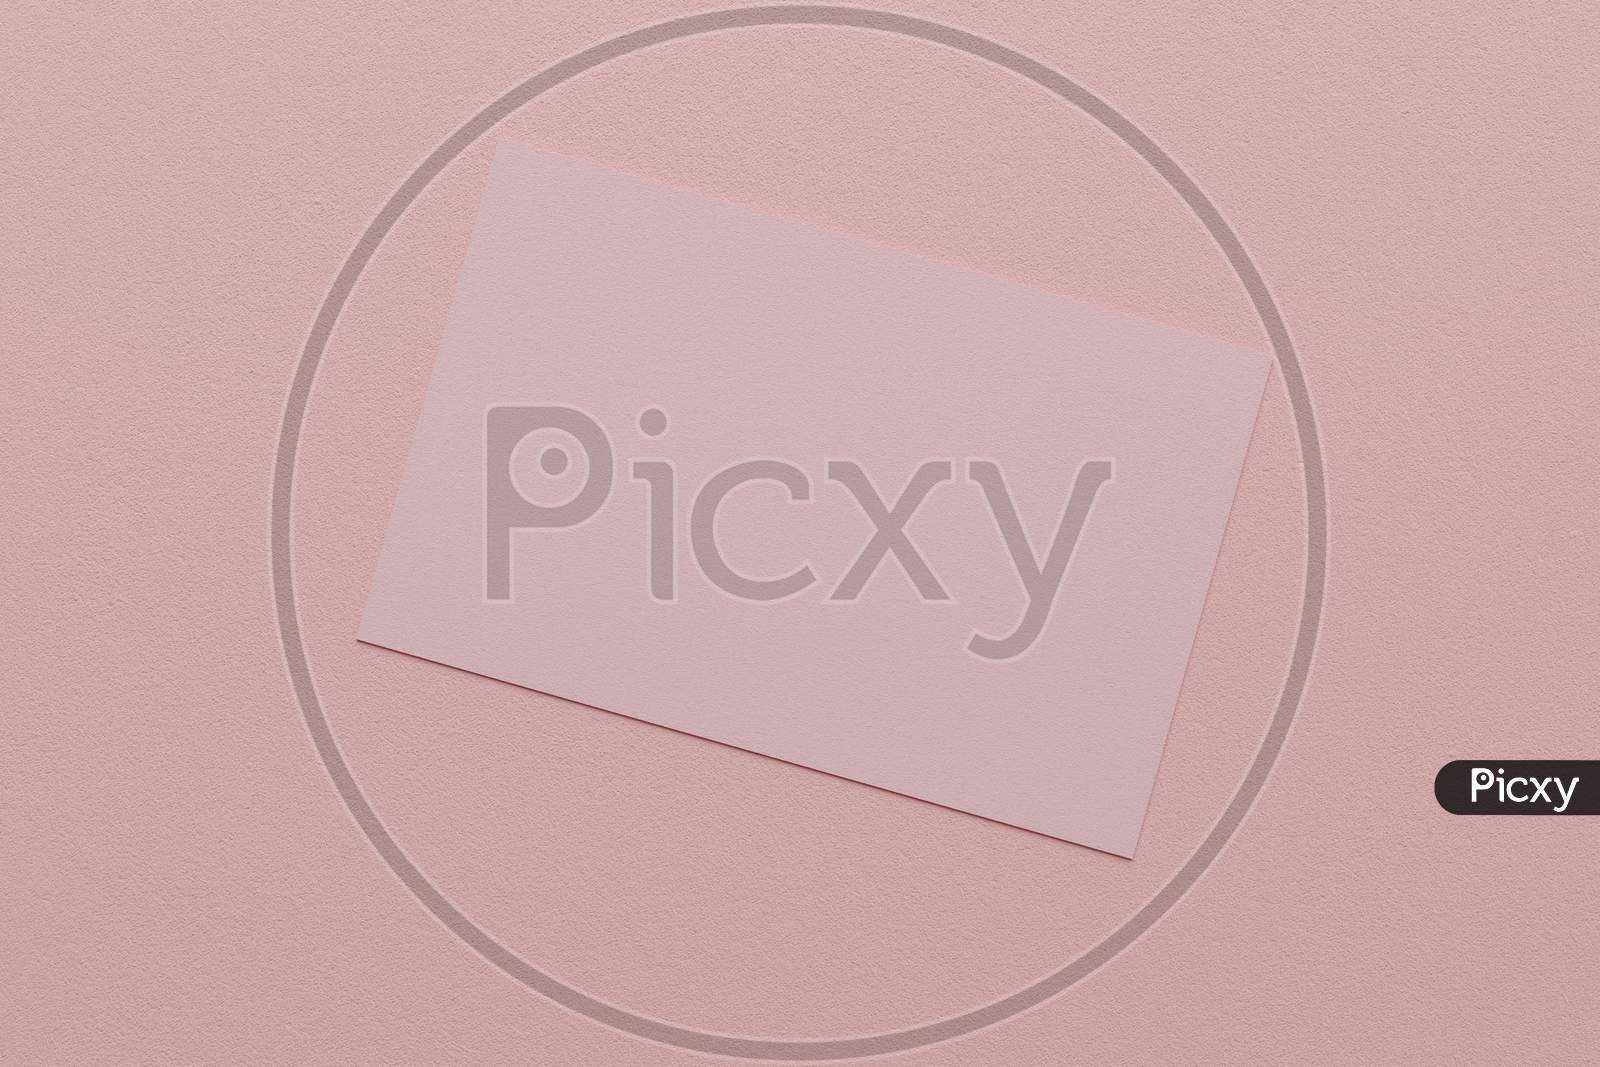 Pink Pastel Business Card Paper Mockup Template With Blank Space Cover For Insert Company Logo Or Personal Identity On Cardboard Background. Modern Stationary Concept. 3D Illustration Render